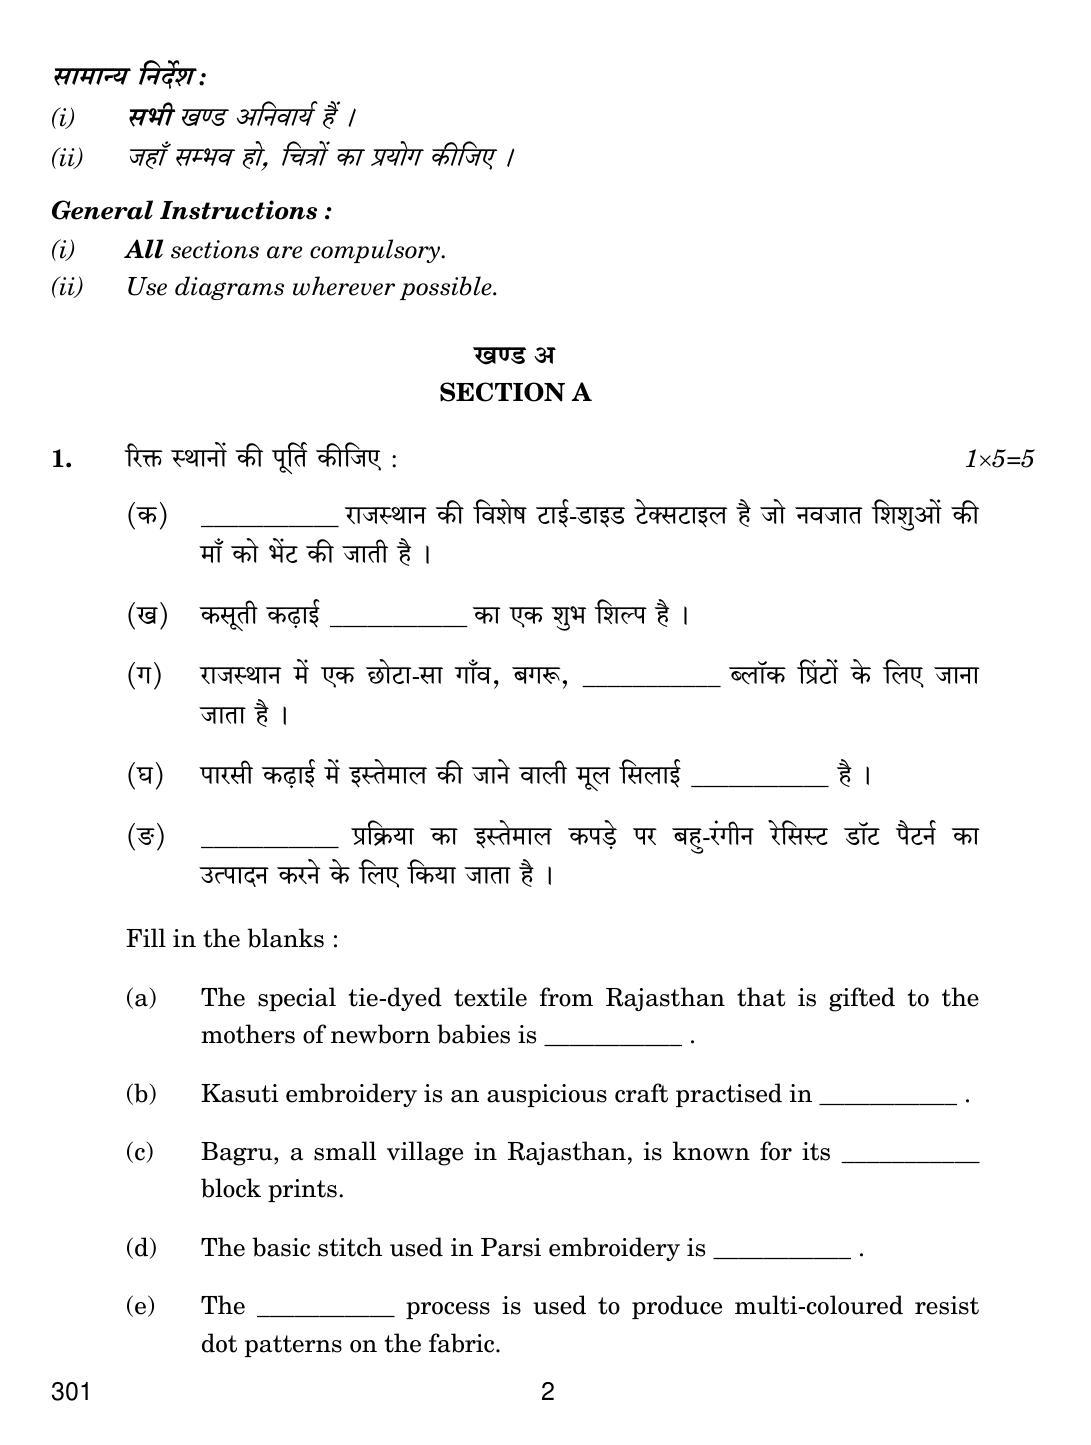 CBSE Class 12 301 TRAD. INDIAN TEXTILE 2018 Question Paper - Page 2